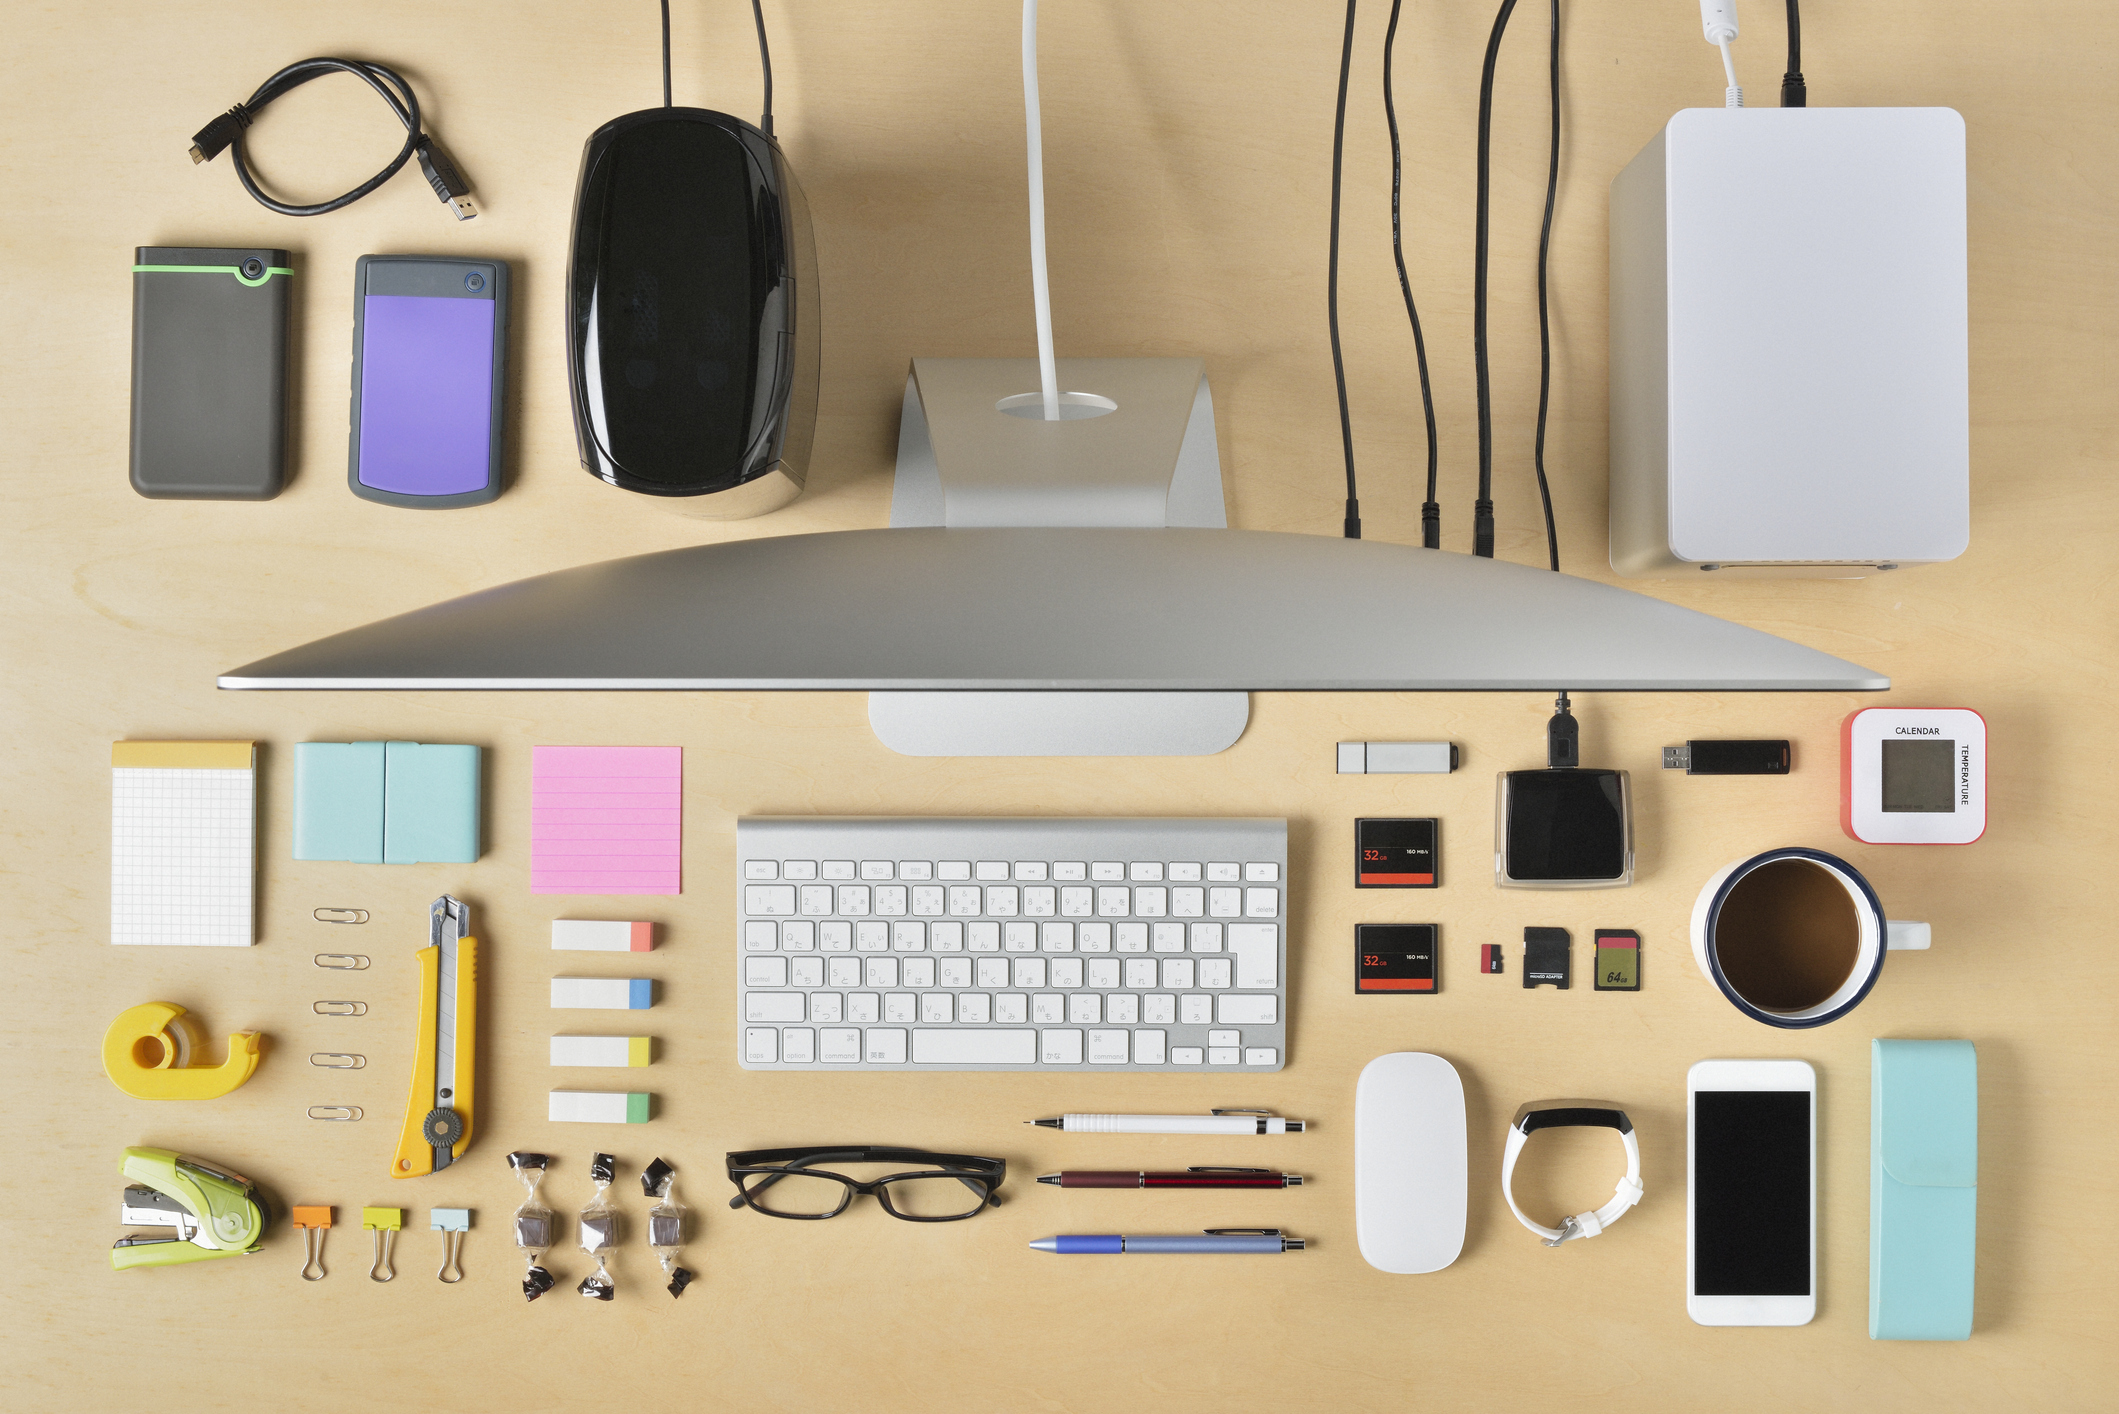 Must-have gadgets and accessories to make working from home more